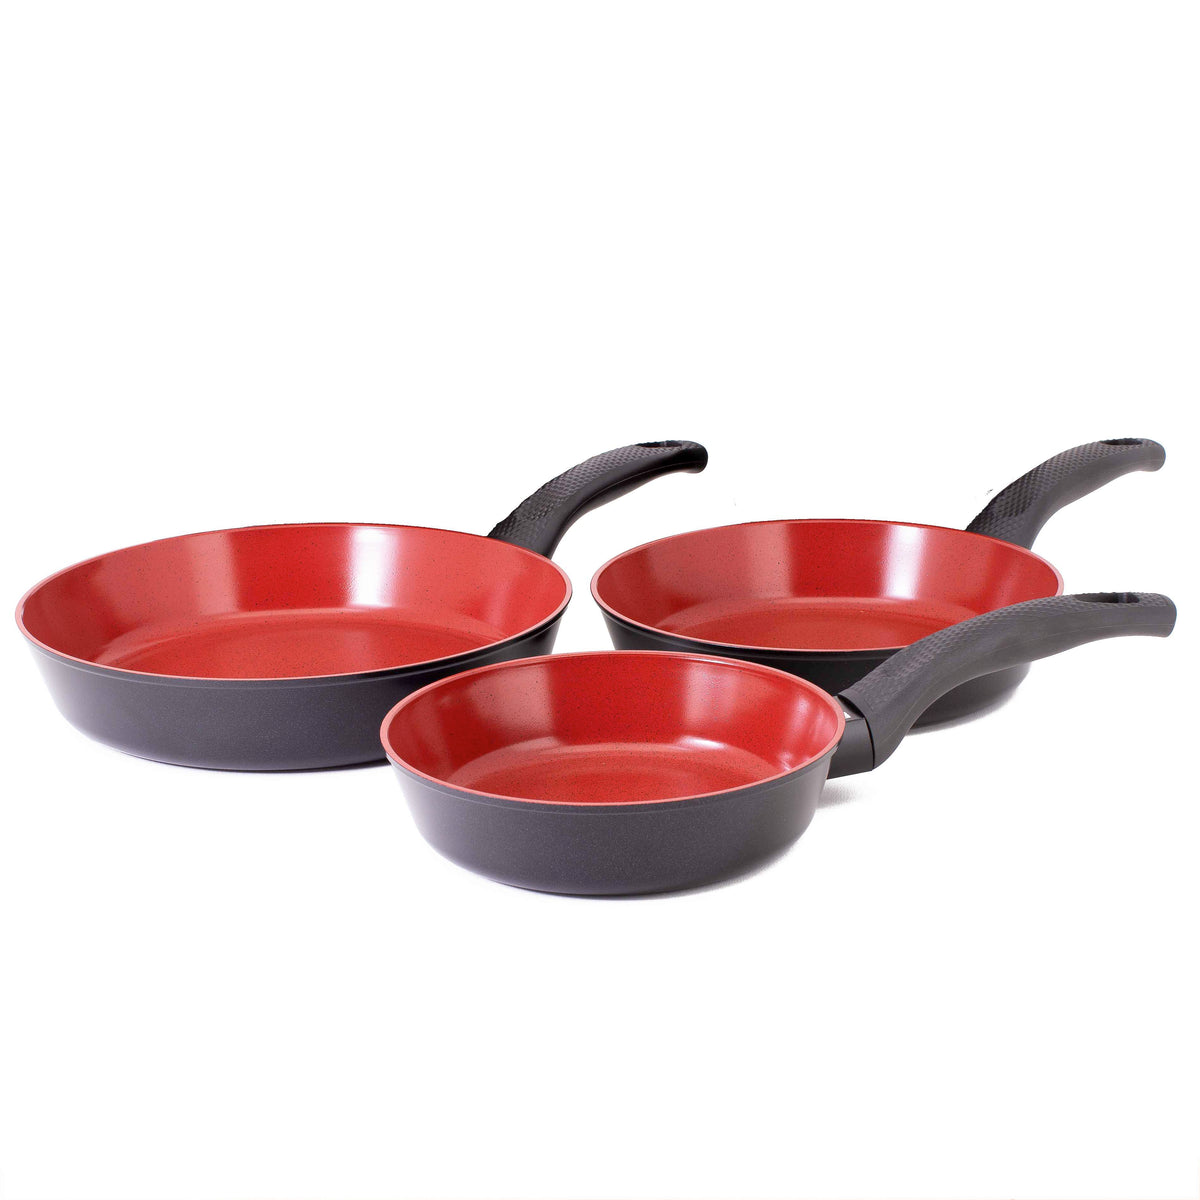 Neoflam De Chef induction set of 3 Frypans 20, 24 and 28cm